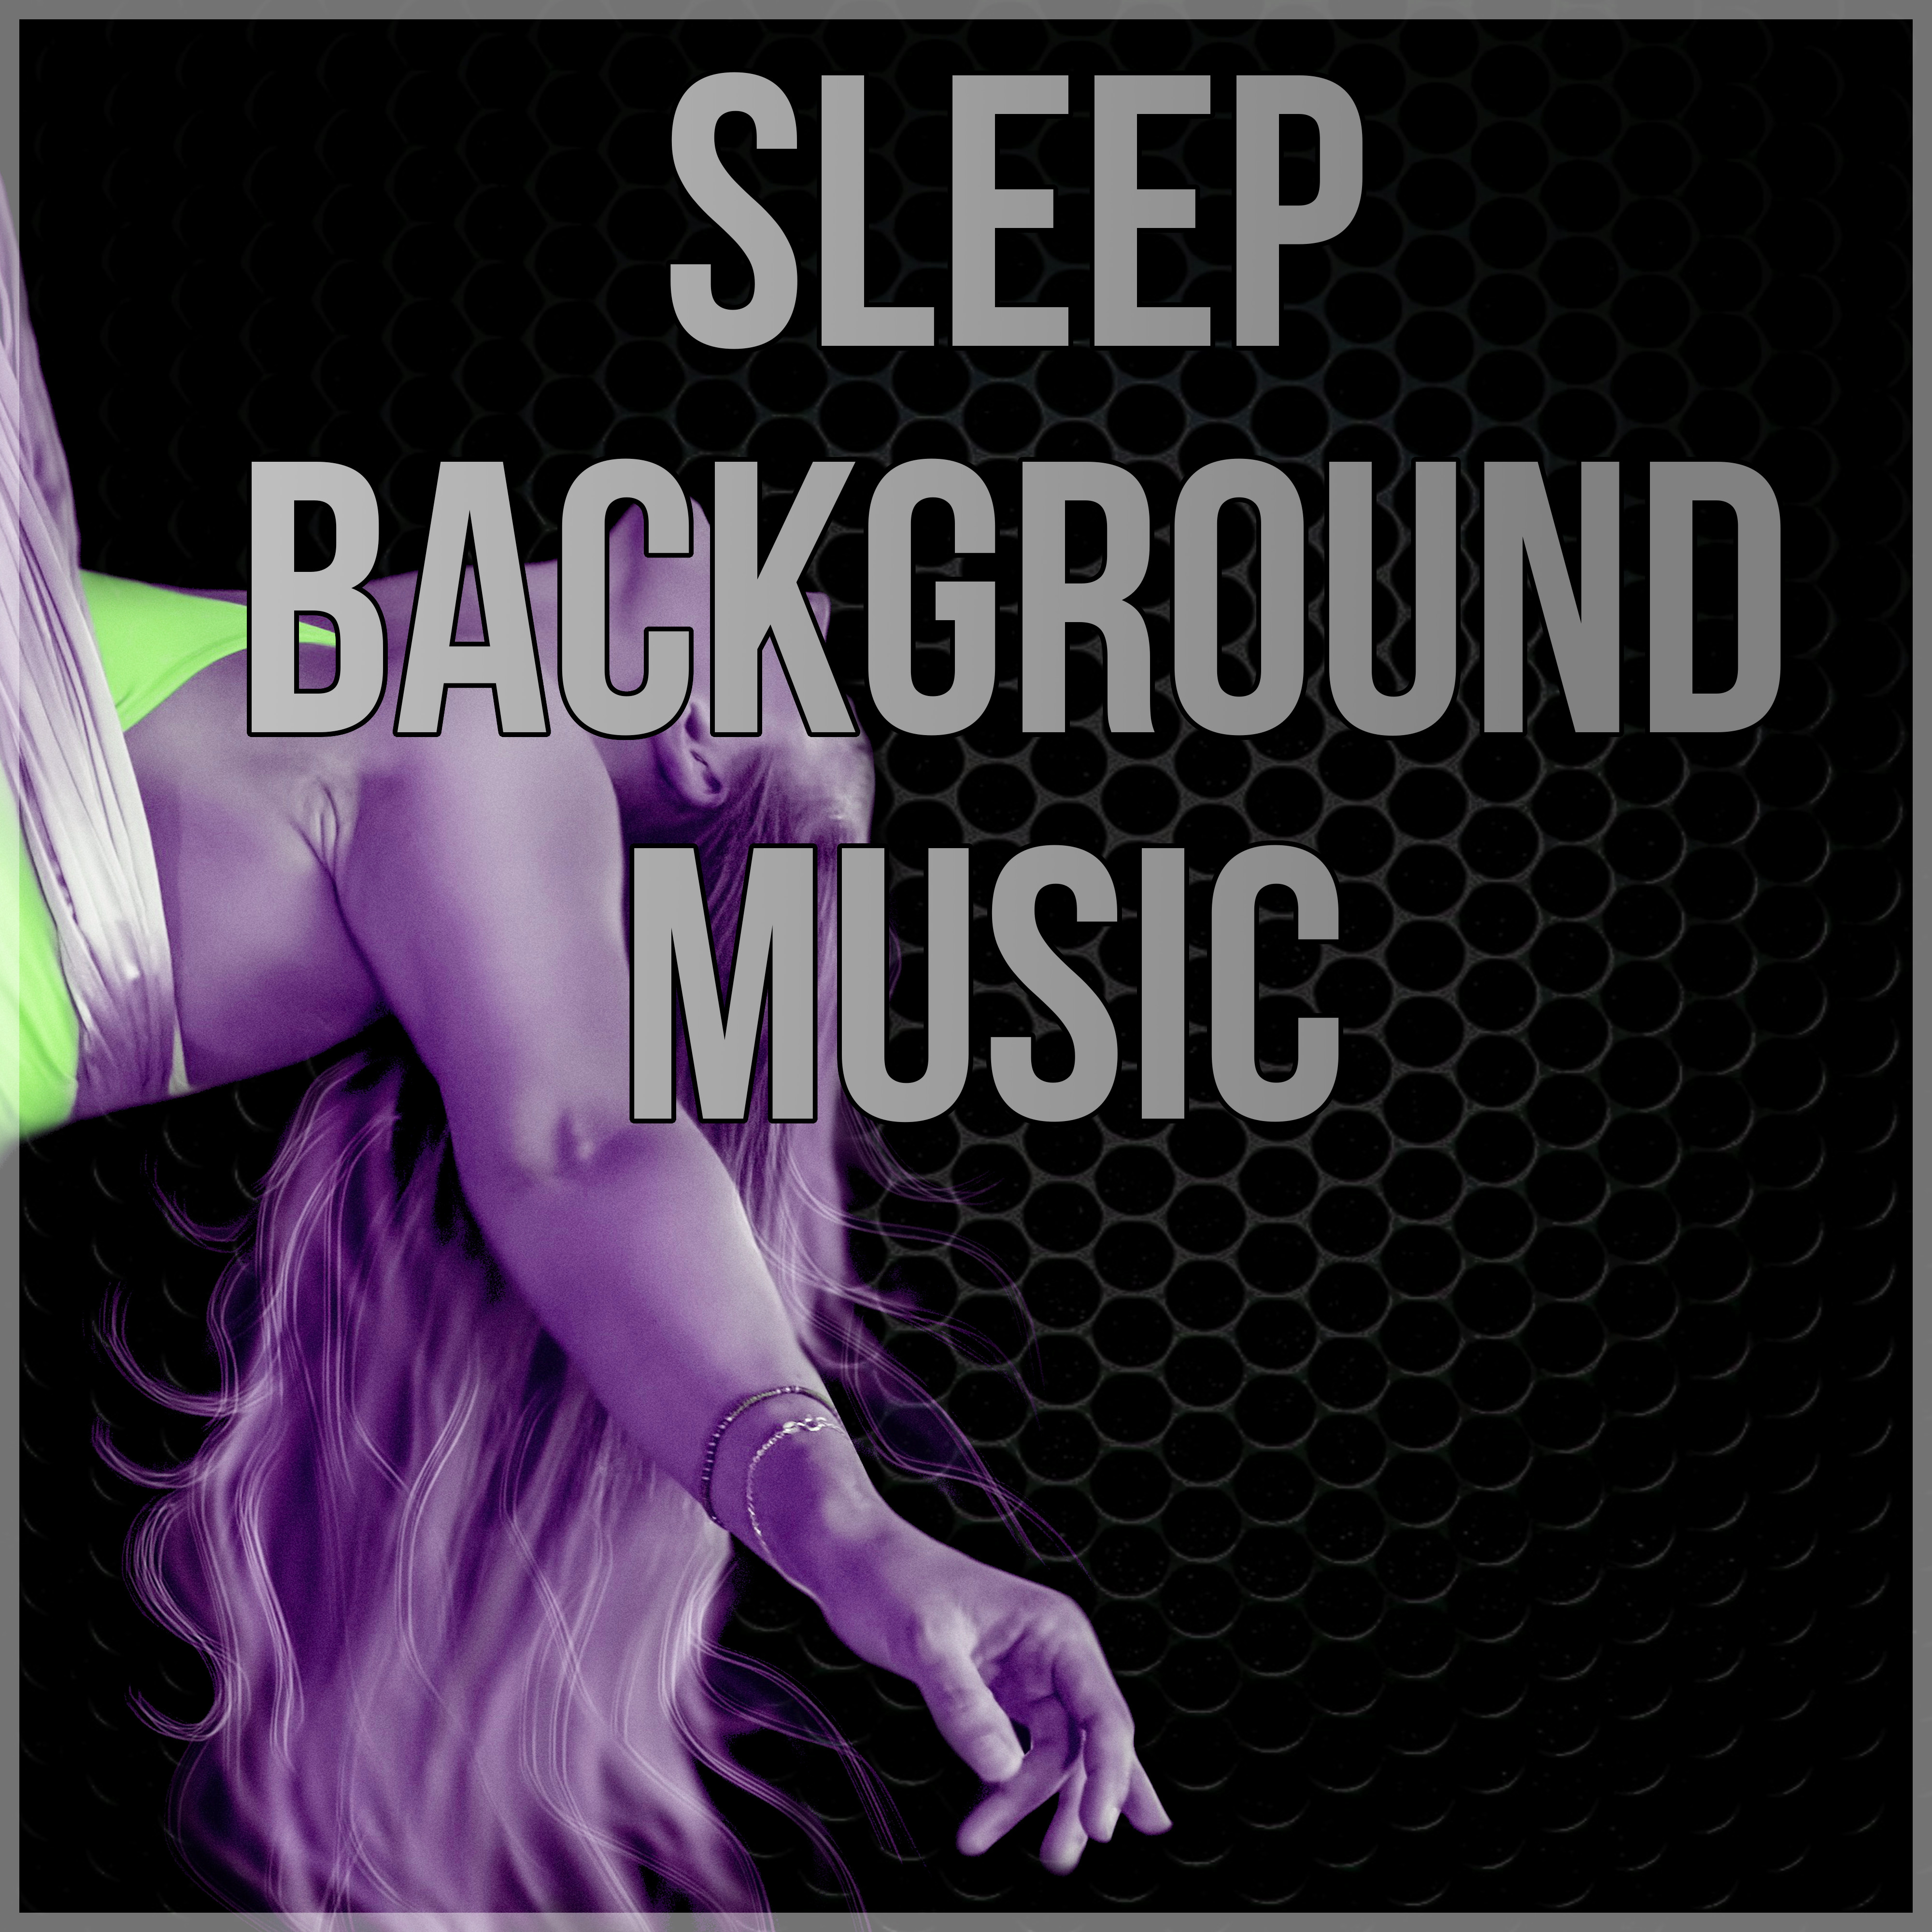 Sleep Background Music  Lullabies, Nature Sounds, Insomnia Therapy, Ambient Music, Relaxing Massage, Serenity Music, Relaxation